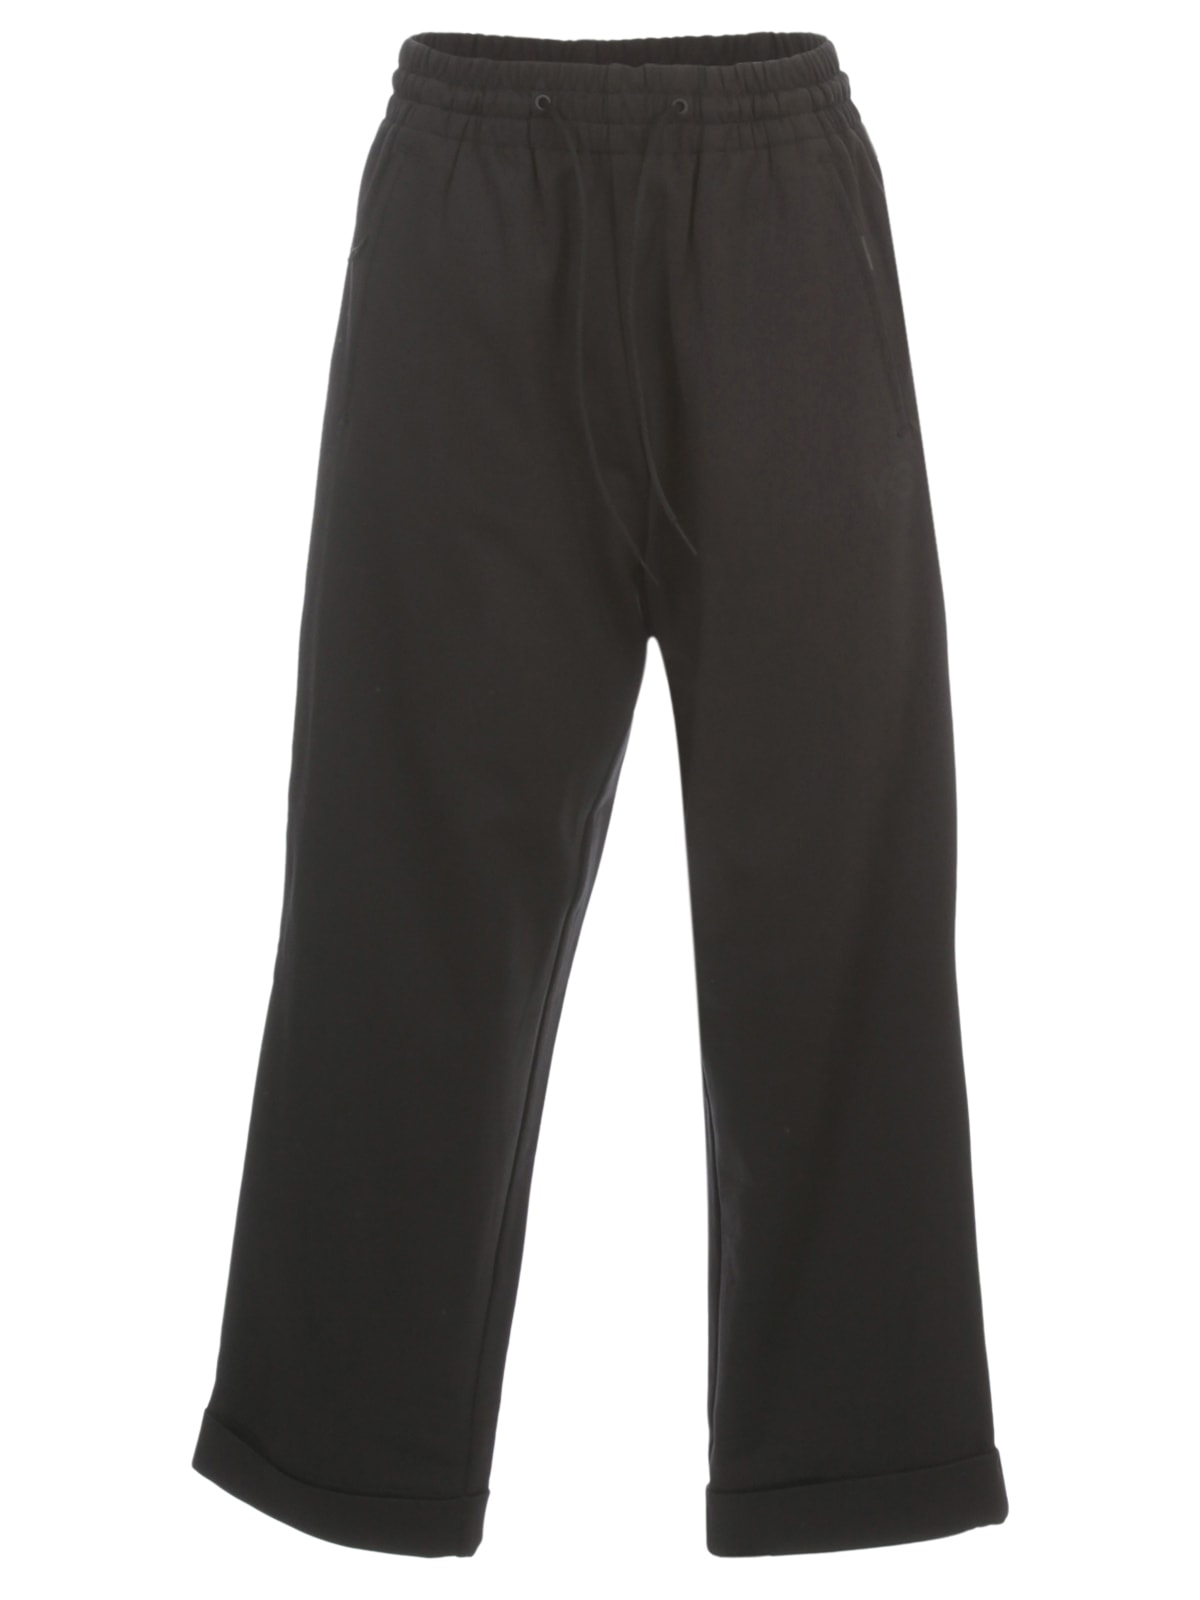 Y-3 W CLASSIC TURN UP TRACK PANTS,11276932